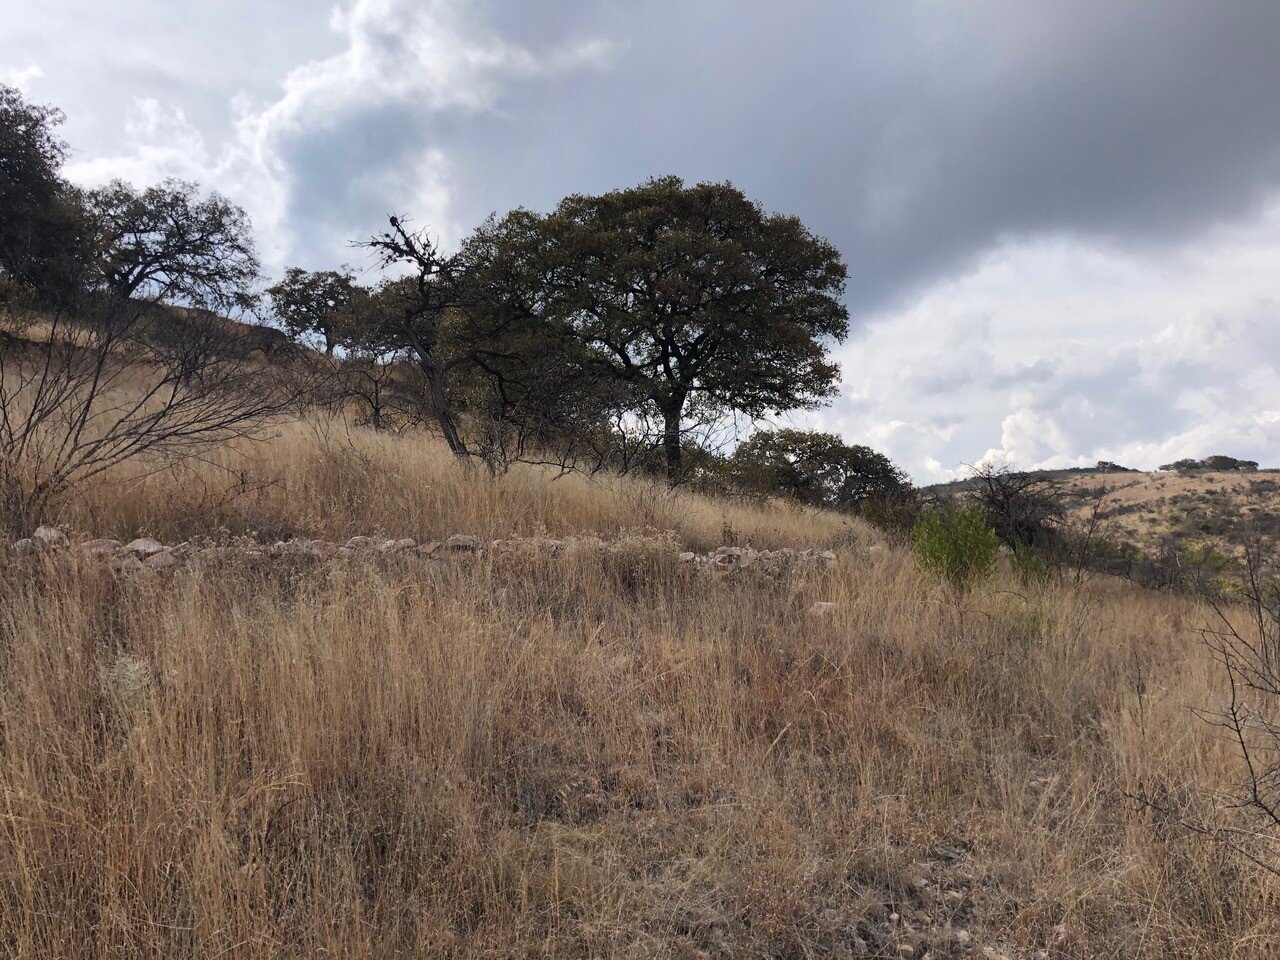  A lone oak in a savanna at Las Tinajas, comparable to oak savanna in the Willamette Valley.&nbsp; Guanajuato has at least 13 species of oaks. 